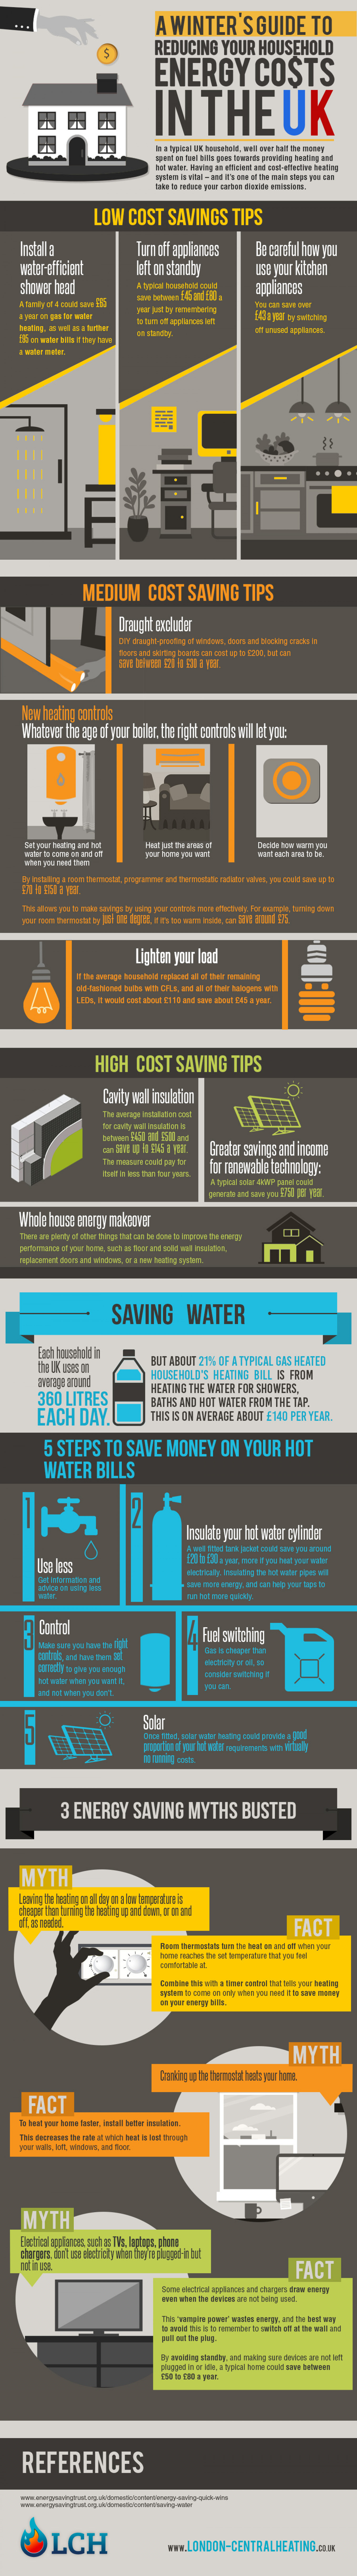 Reduce Household Energy Costs Infographic